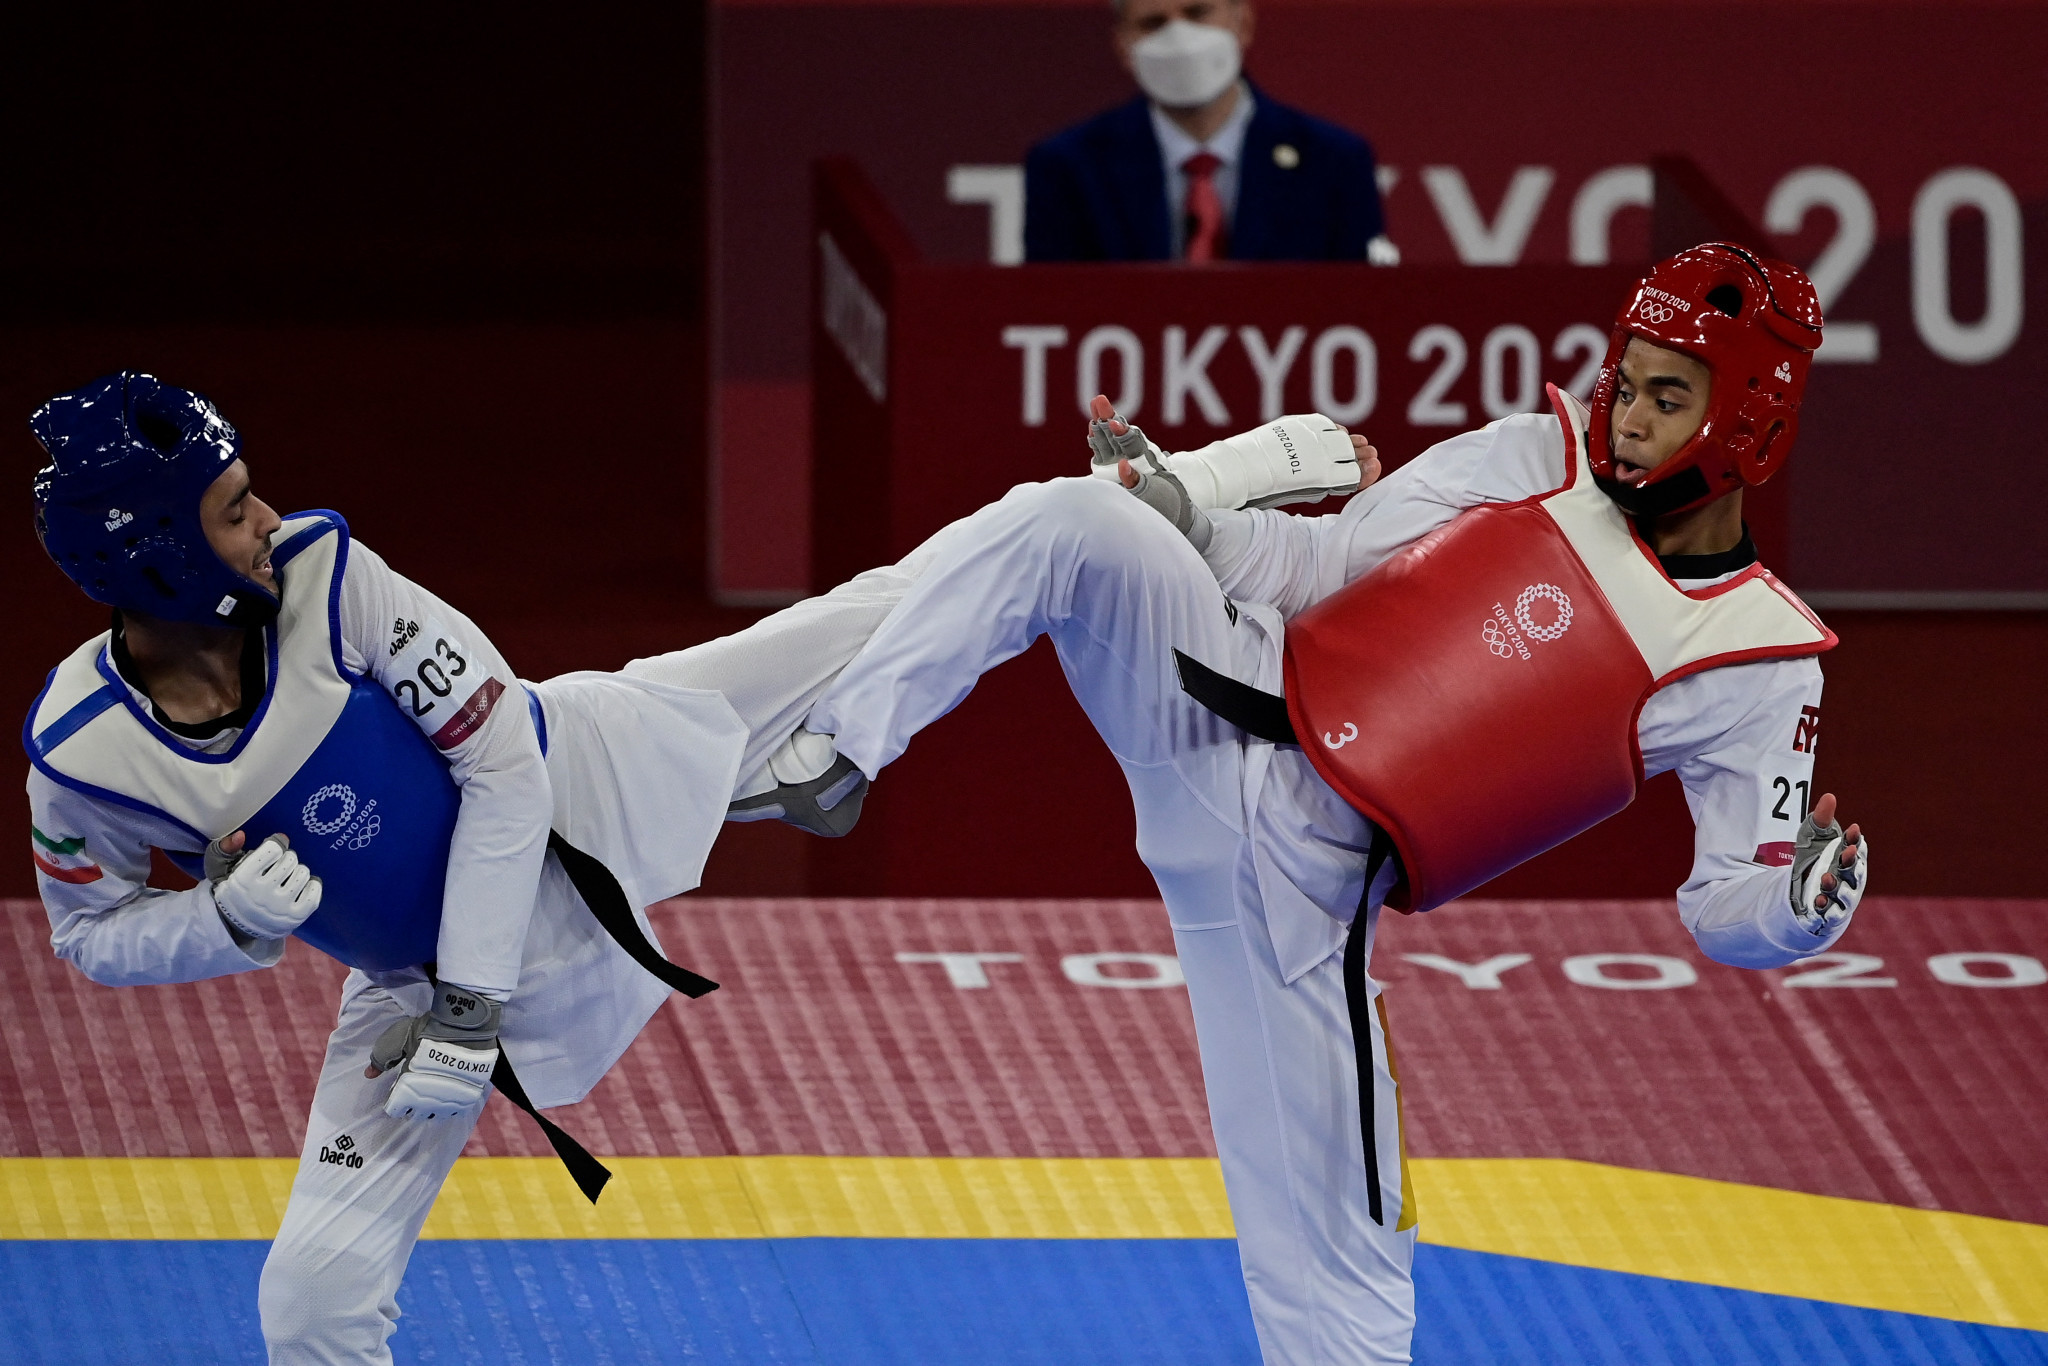 Armin Hadipour, left, competed for Iran in taekwondo at the Tokyo 2020 Olympics ©Getty Images